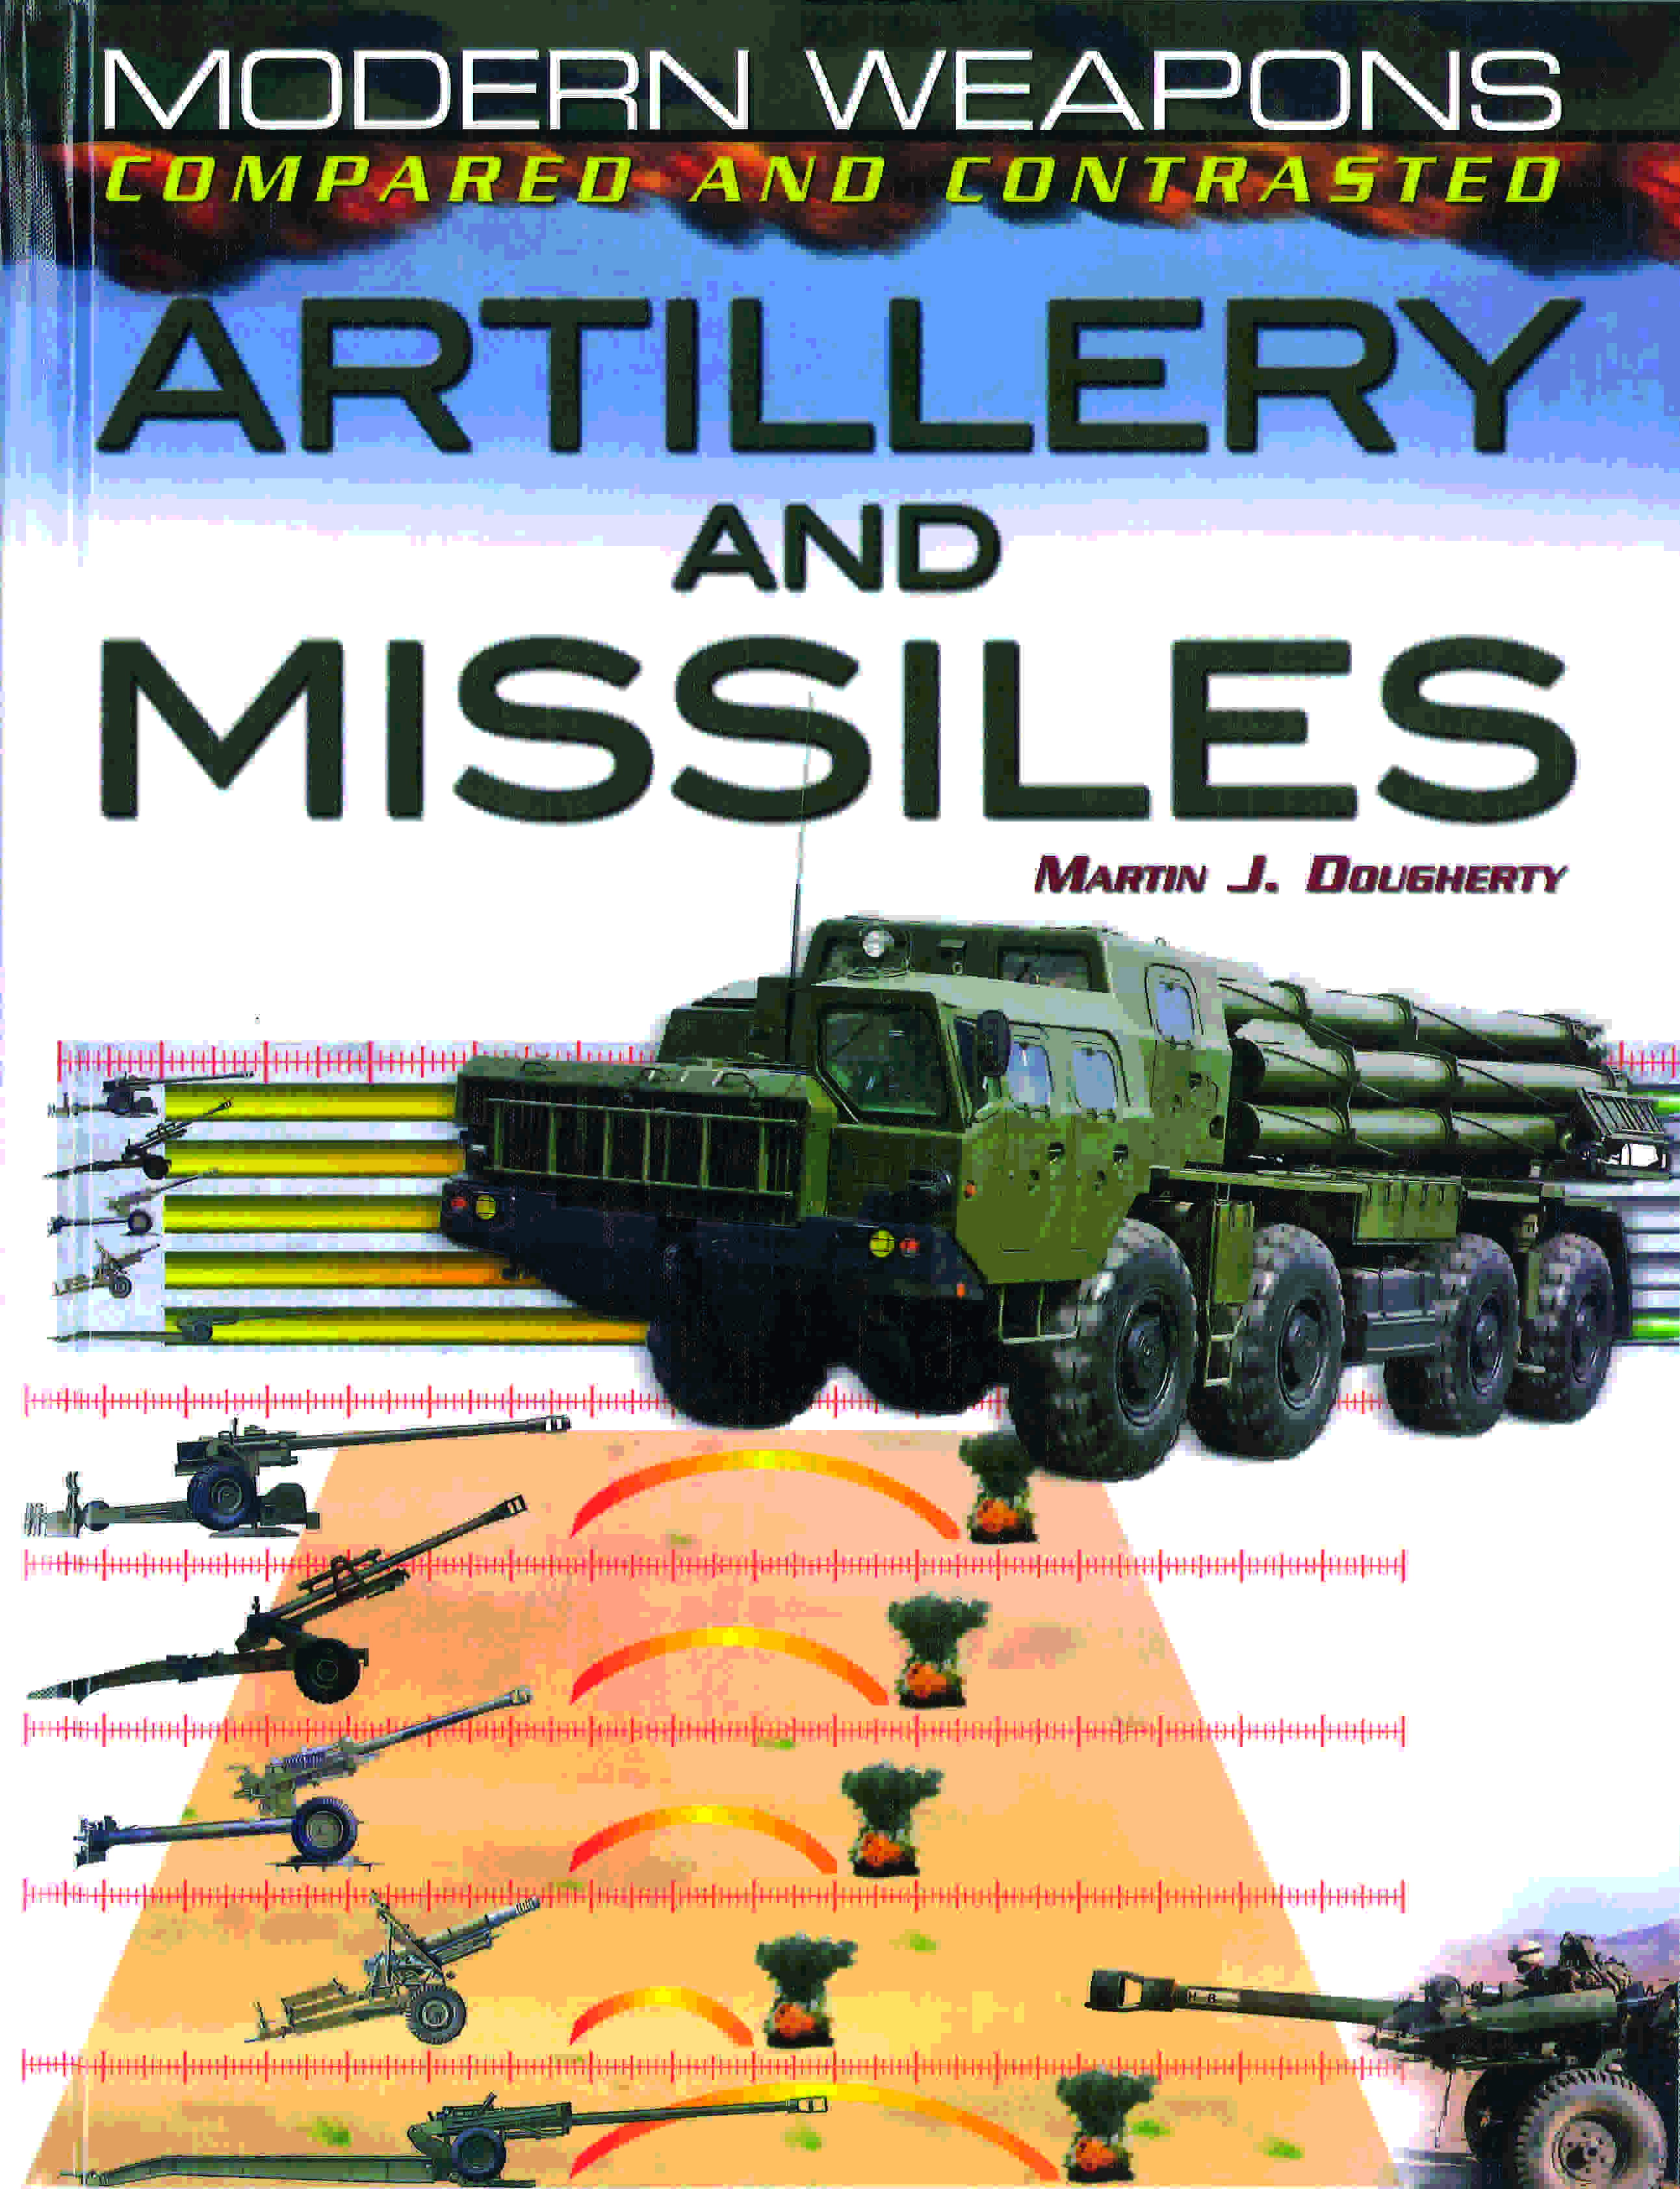 Modern Weapons Compared And Contrasted: Artillery and Missiles